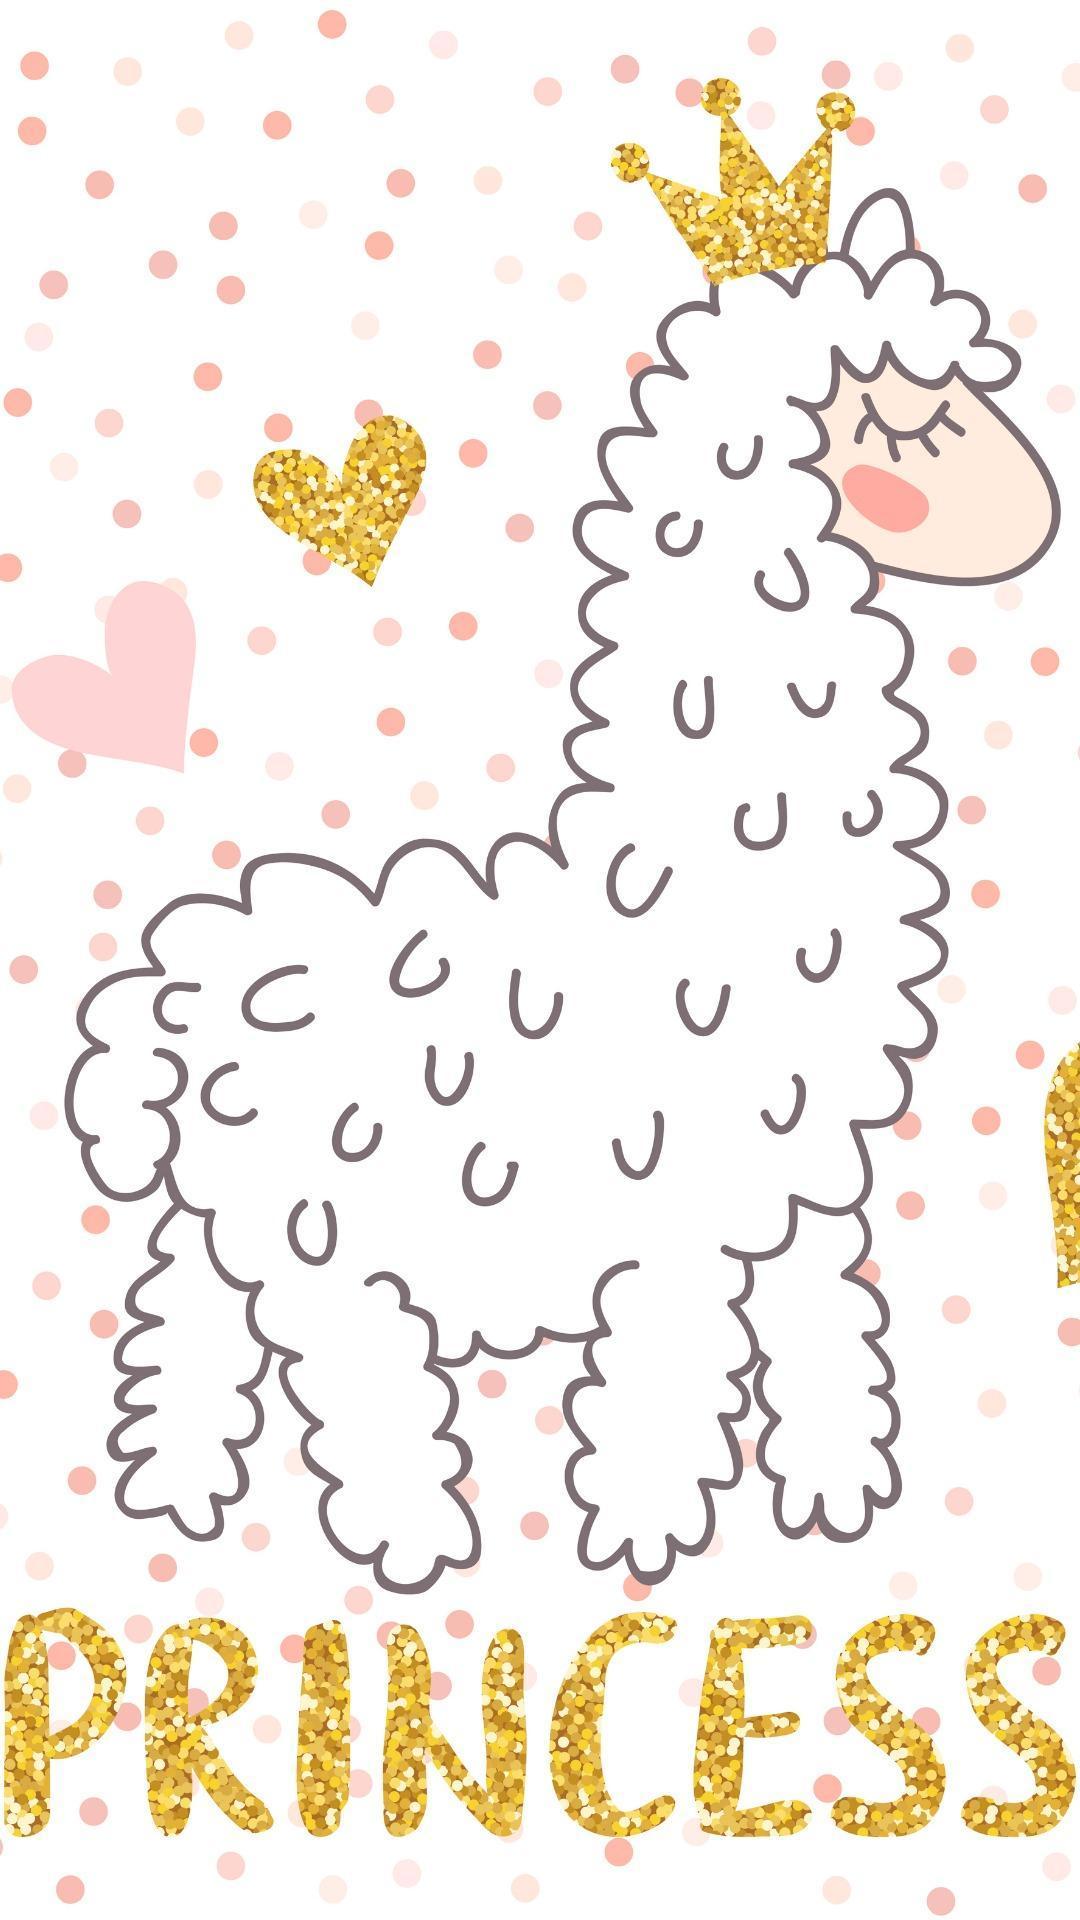 Free download Cute Llama Wallpaper for Android APK Download [1080x1920] for your Desktop, Mobile & Tablet. Explore Llama Background. Llama Background, Llama Background, Llama Desktop Wallpaper